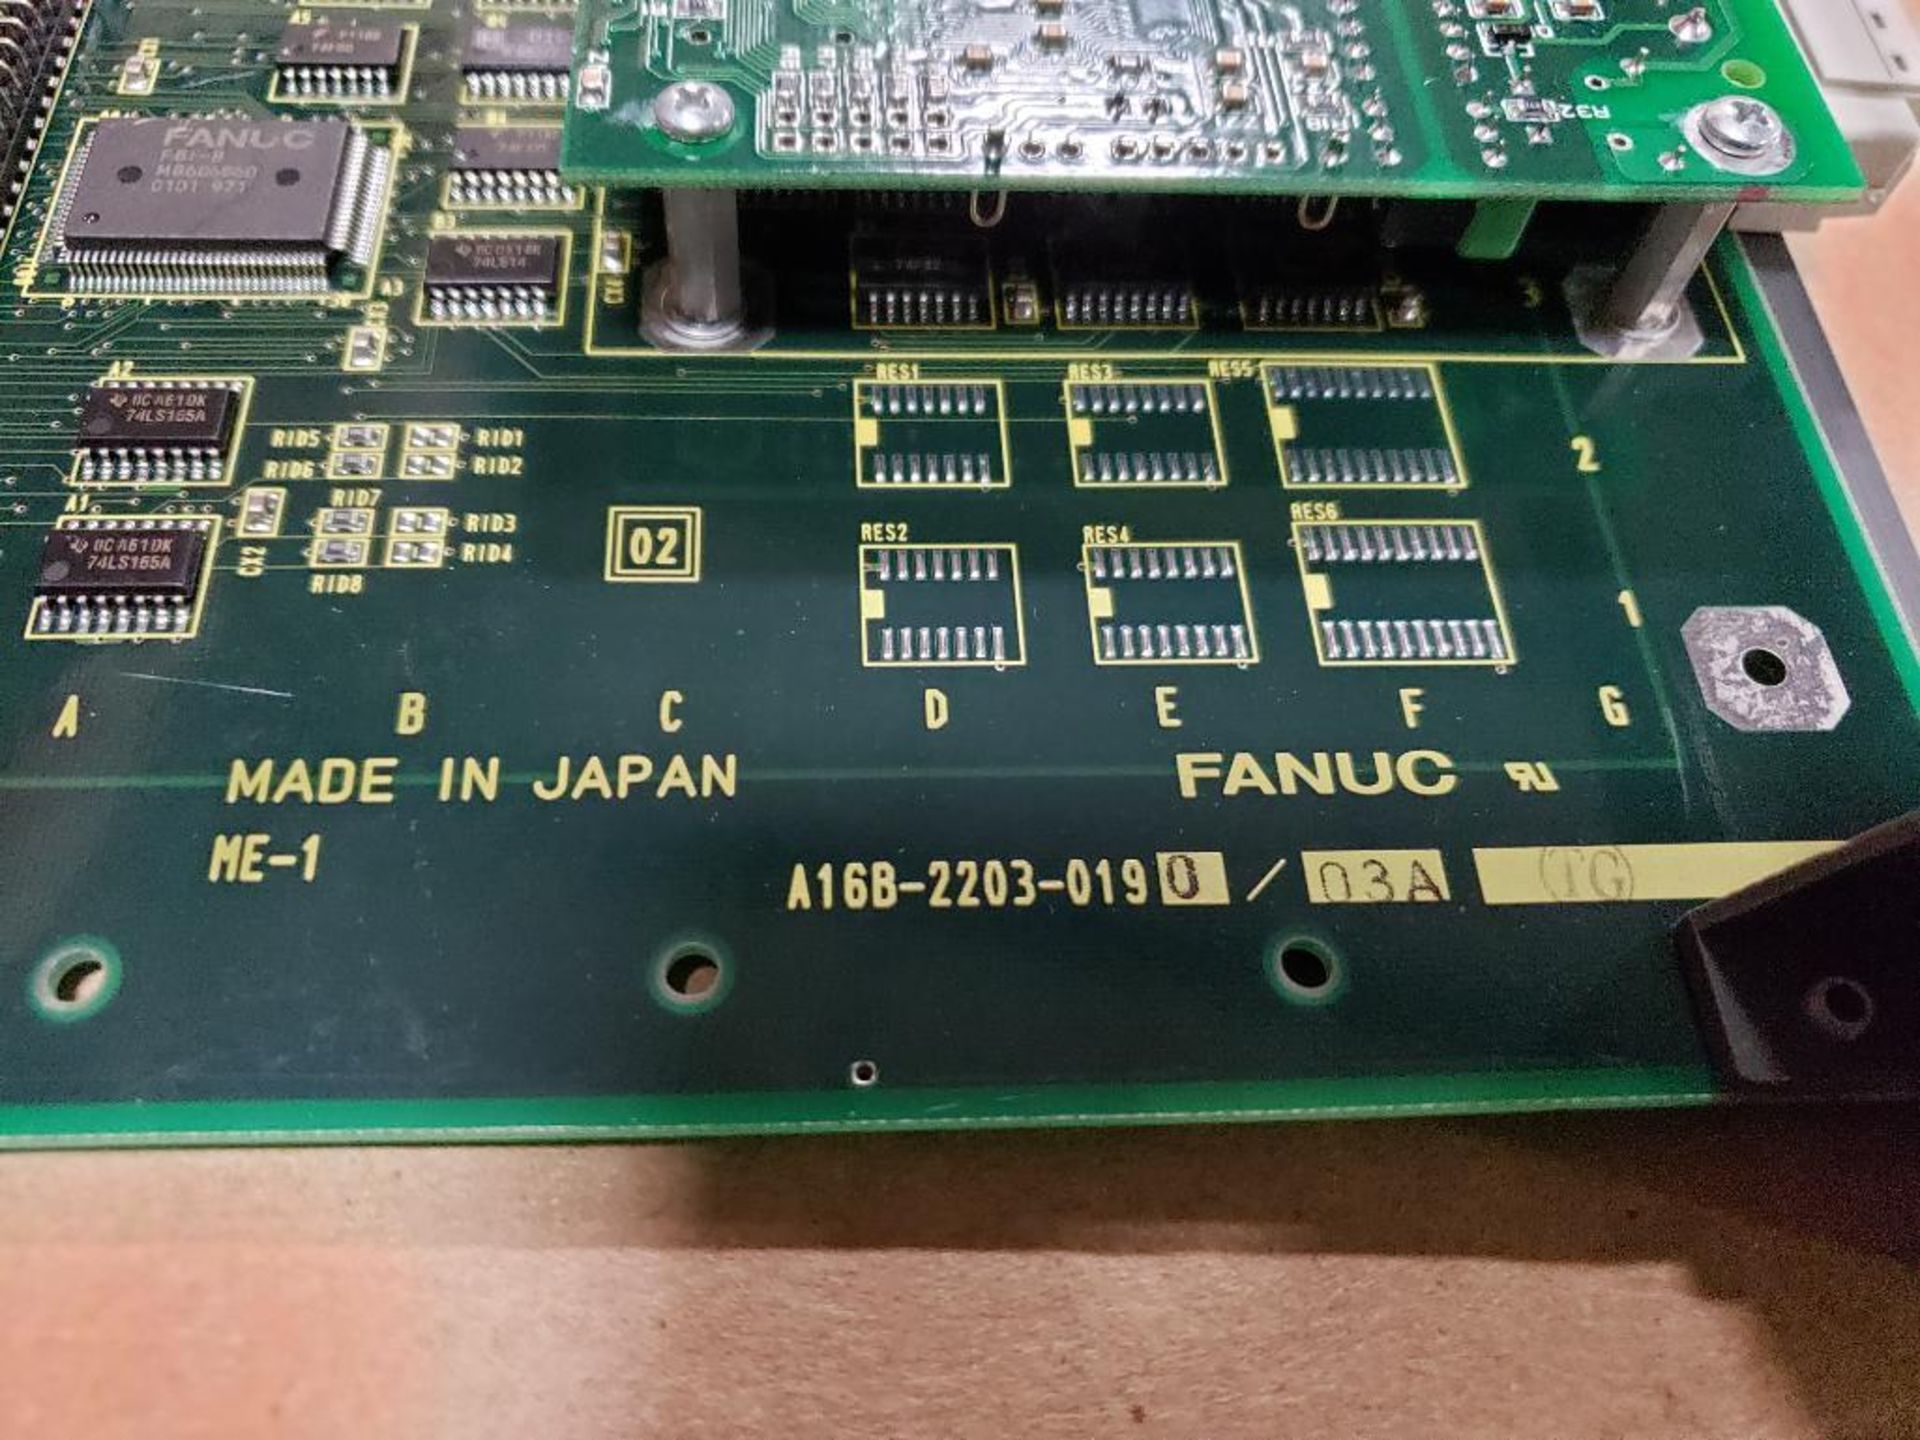 Qty 3 - Fanuc control board. Part number A16B-2203-0190/03A. - Image 5 of 6